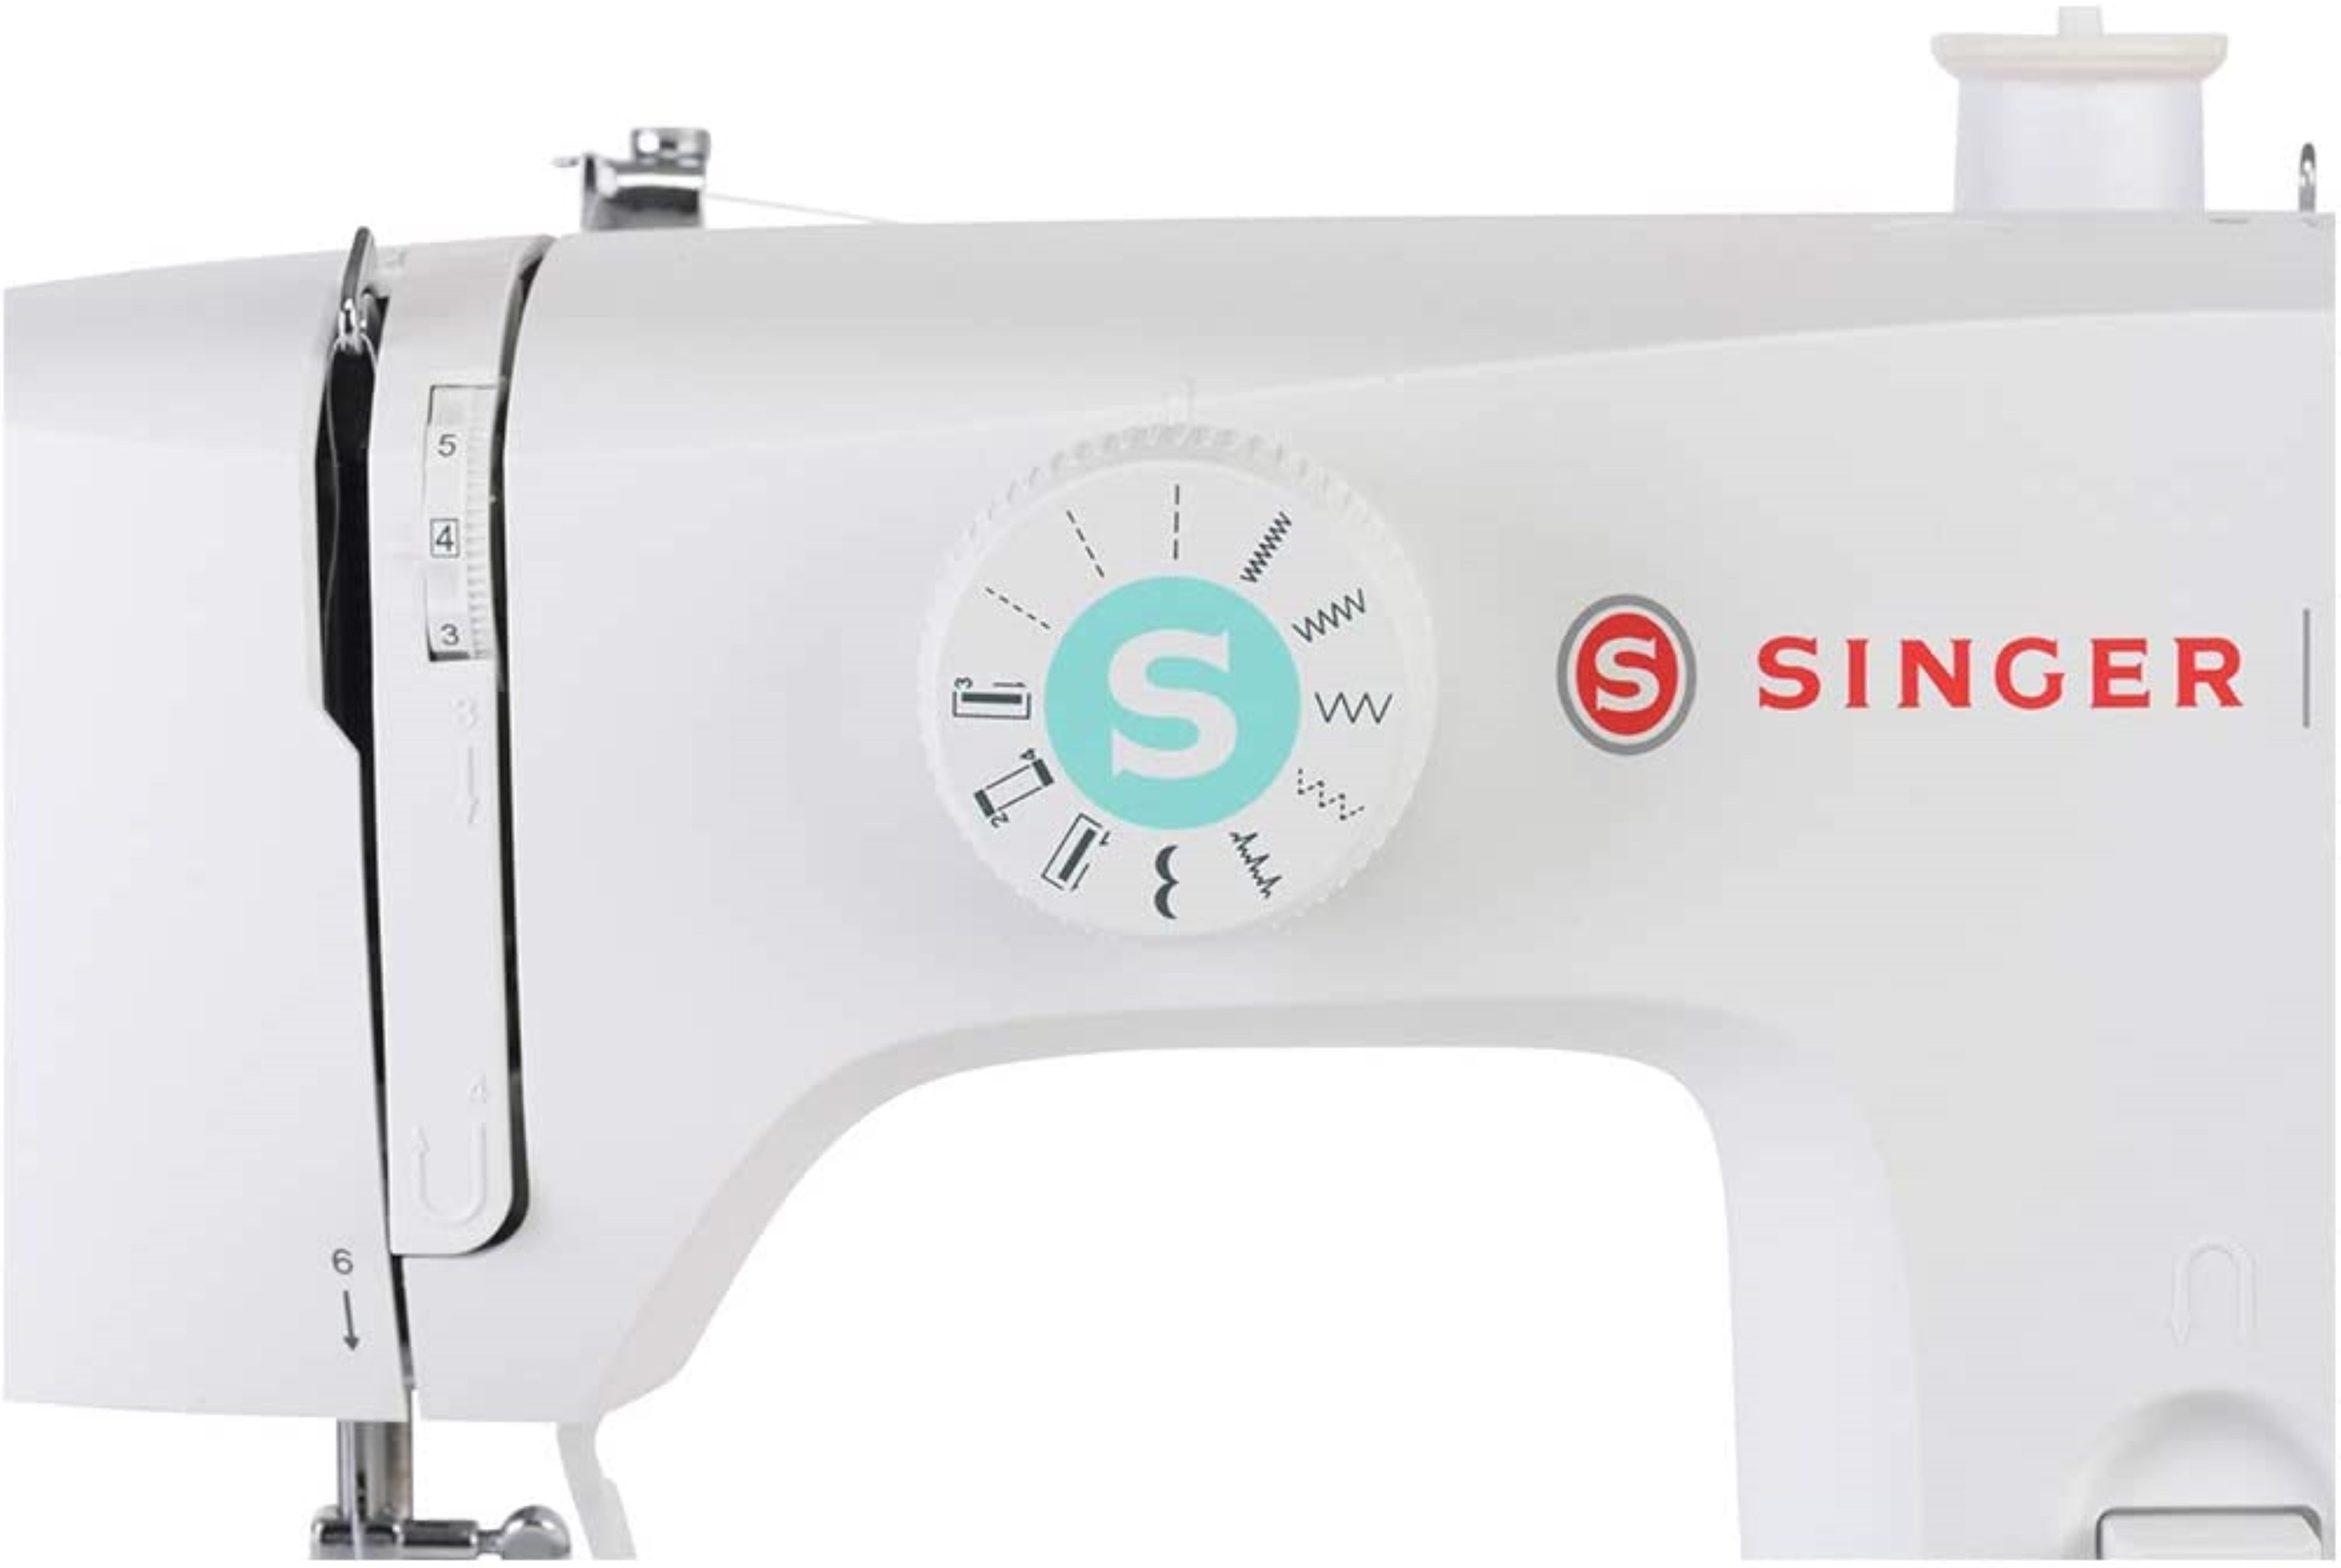 SINGER M1500 Sewing Machine with 6 Built-In Stitches for sale